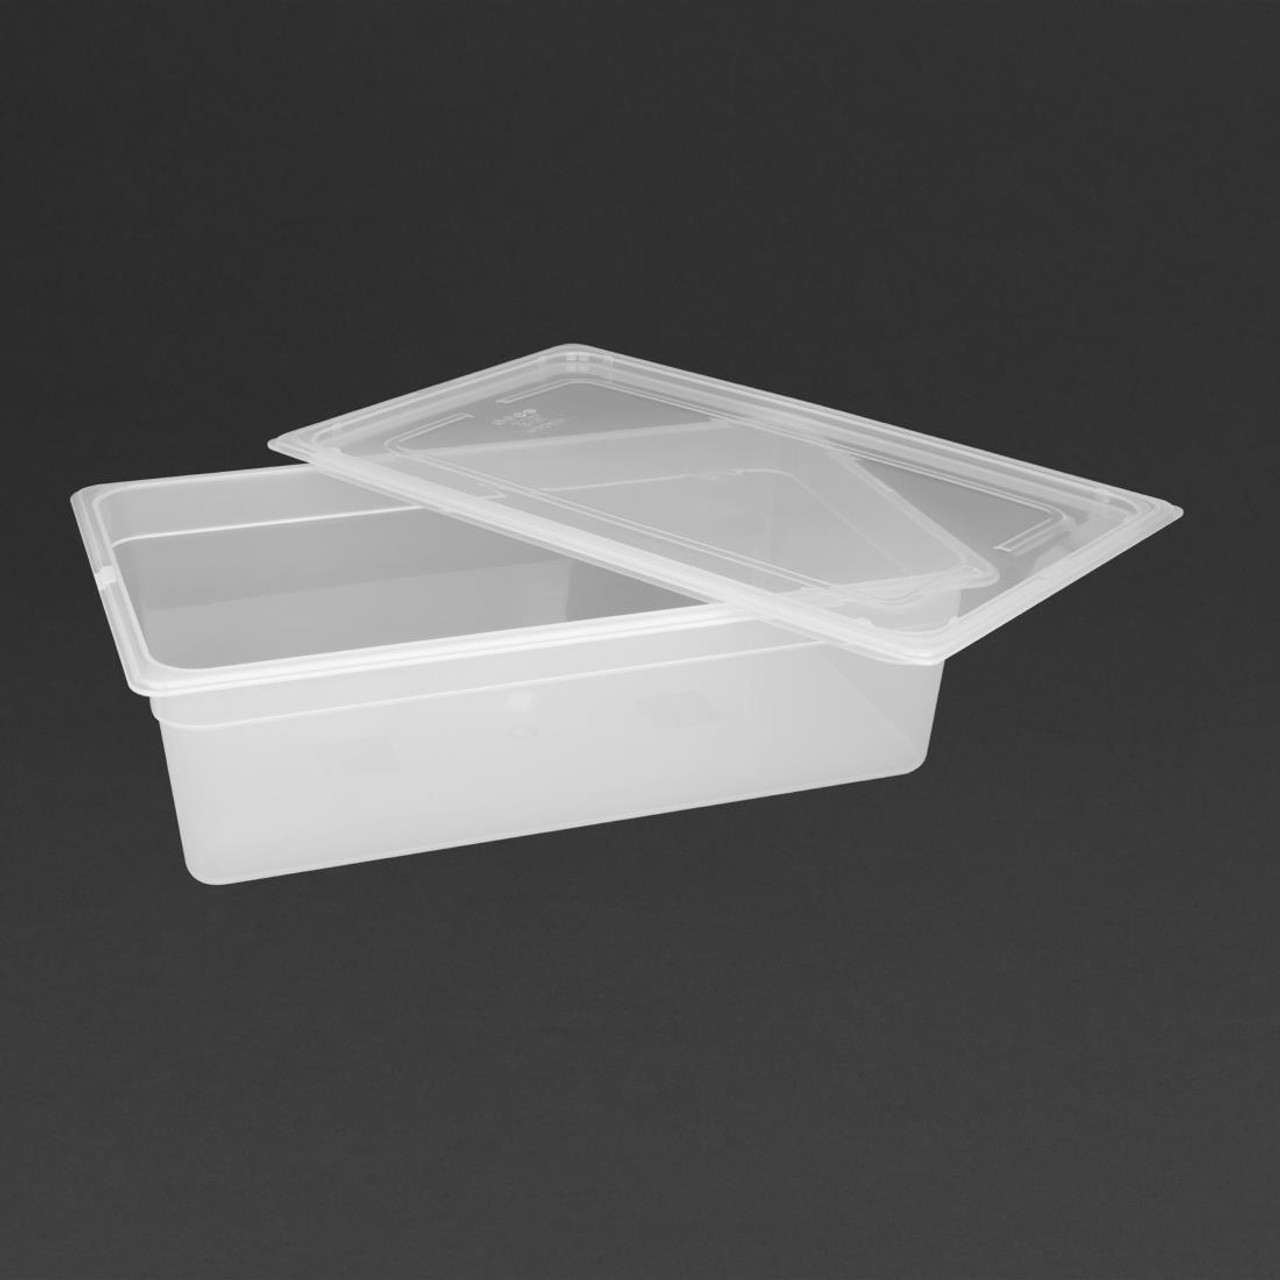 Vogue Polypropylene 1/4 Gastronorm Pan Lid Container Food Storage Catering